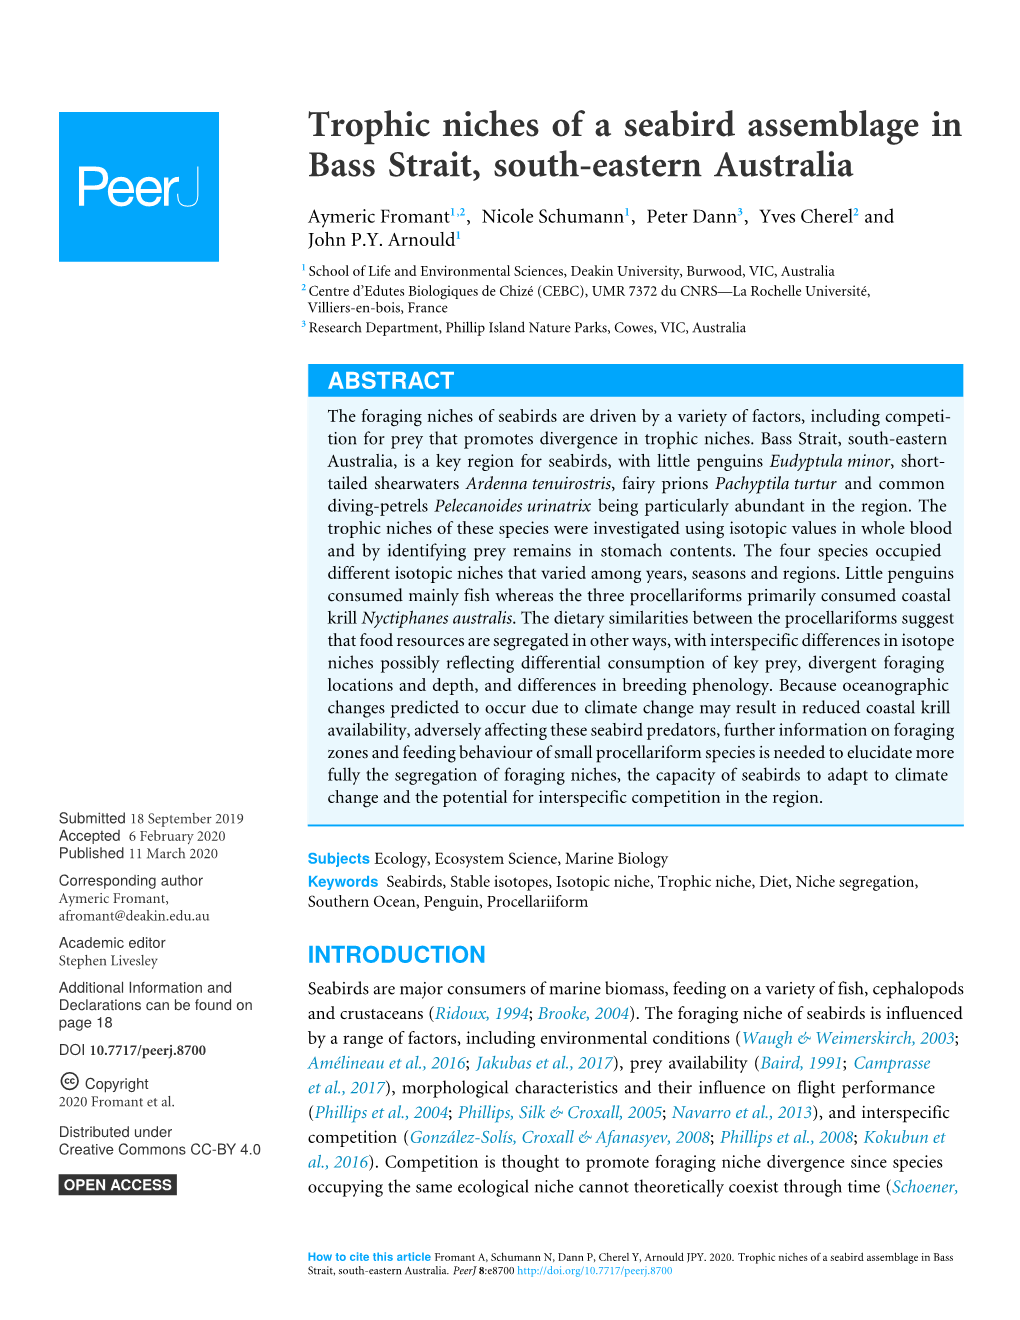 Trophic Niches of a Seabird Assemblage in Bass Strait, South-Eastern Australia